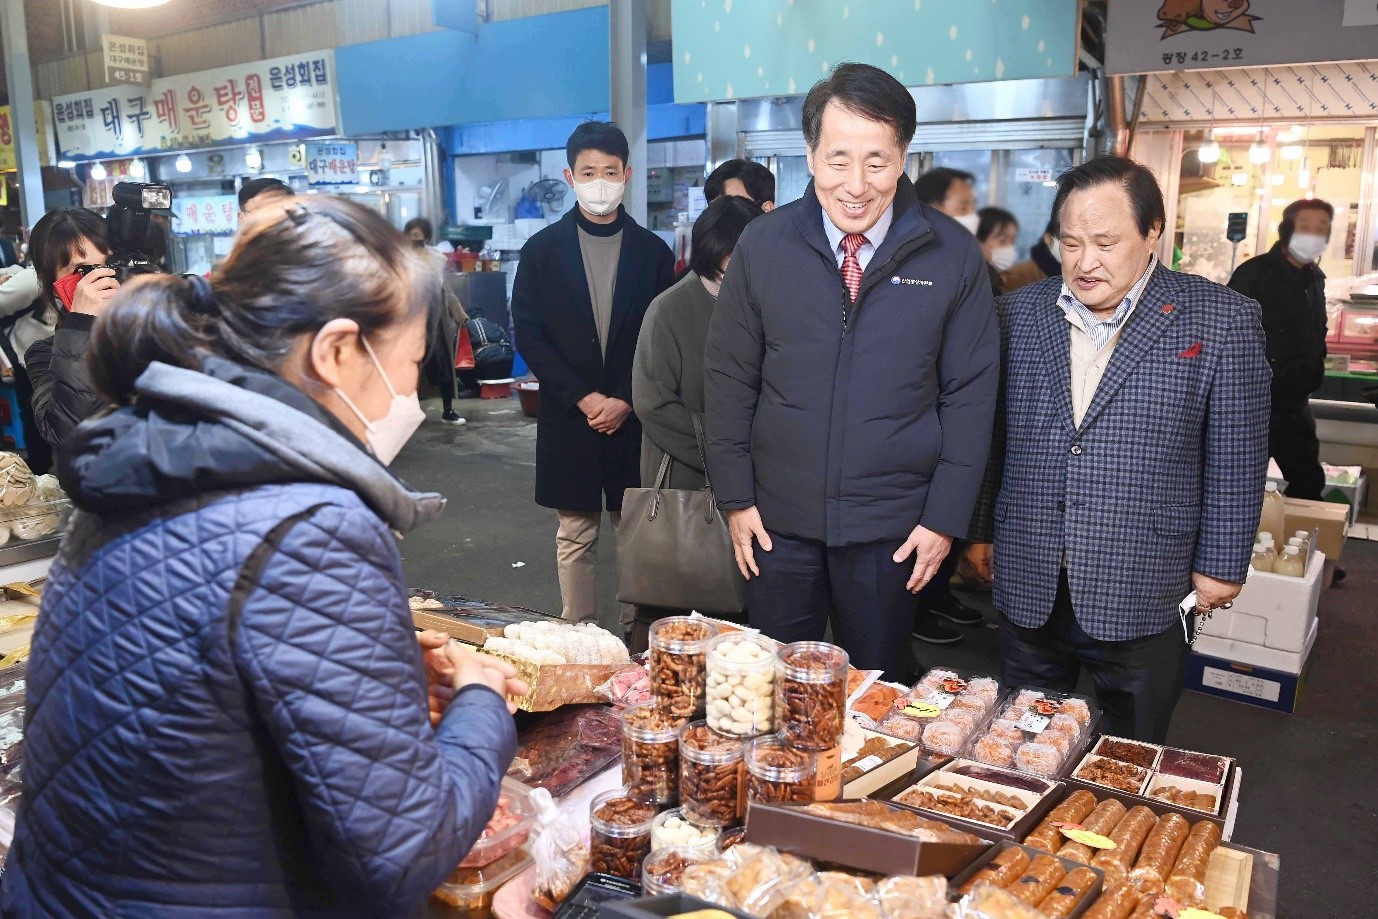 1st Vice Minister visits market ahead of Korea's Lunar New Year holidays